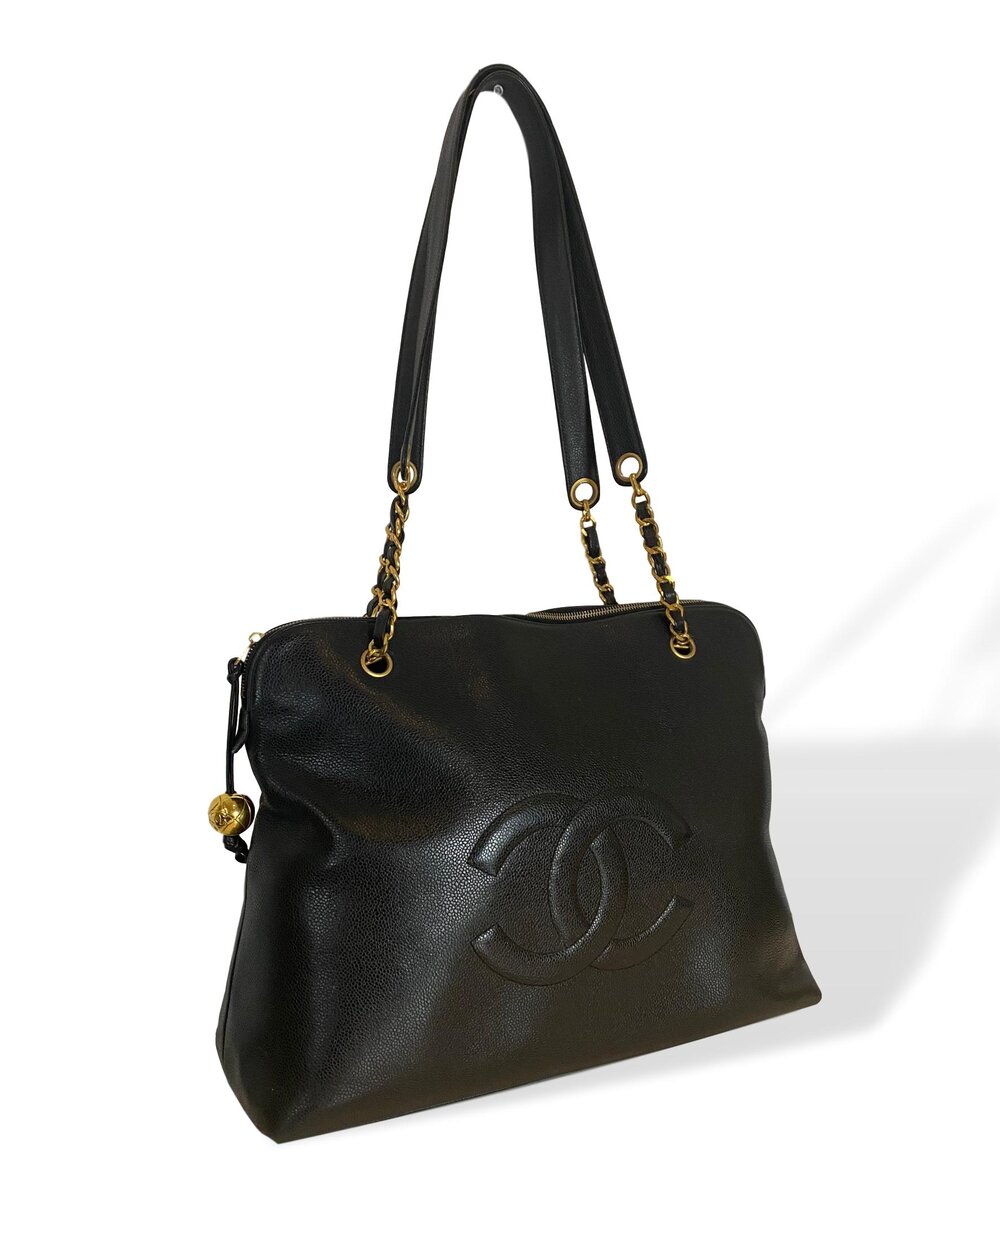 Chanel Timeless Zip Large Black Caviar Vintage Leather Tote, circa 1994